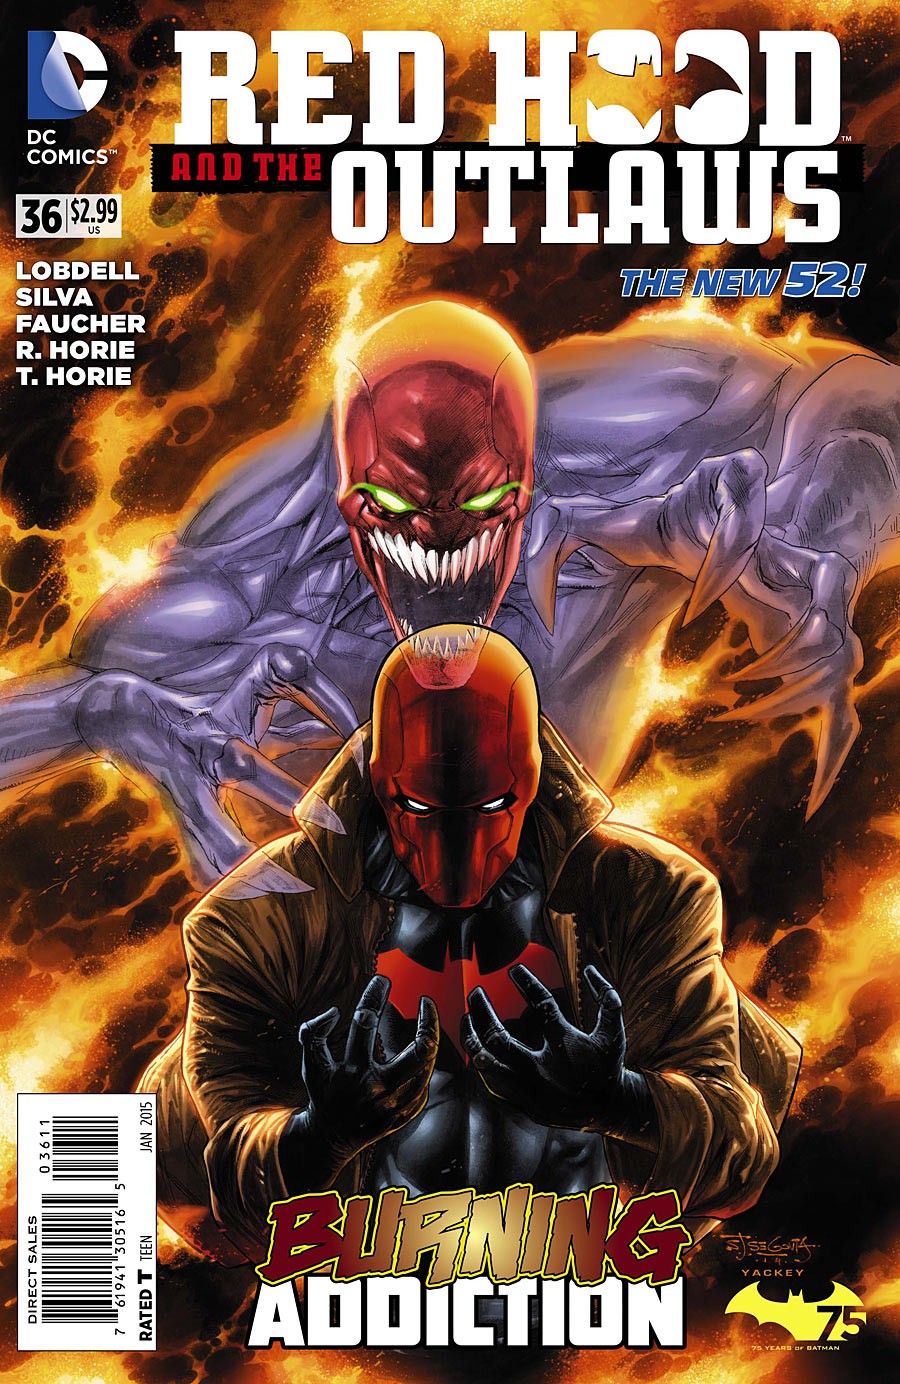 Red Hood and the Outlaws Vol. 1 #36